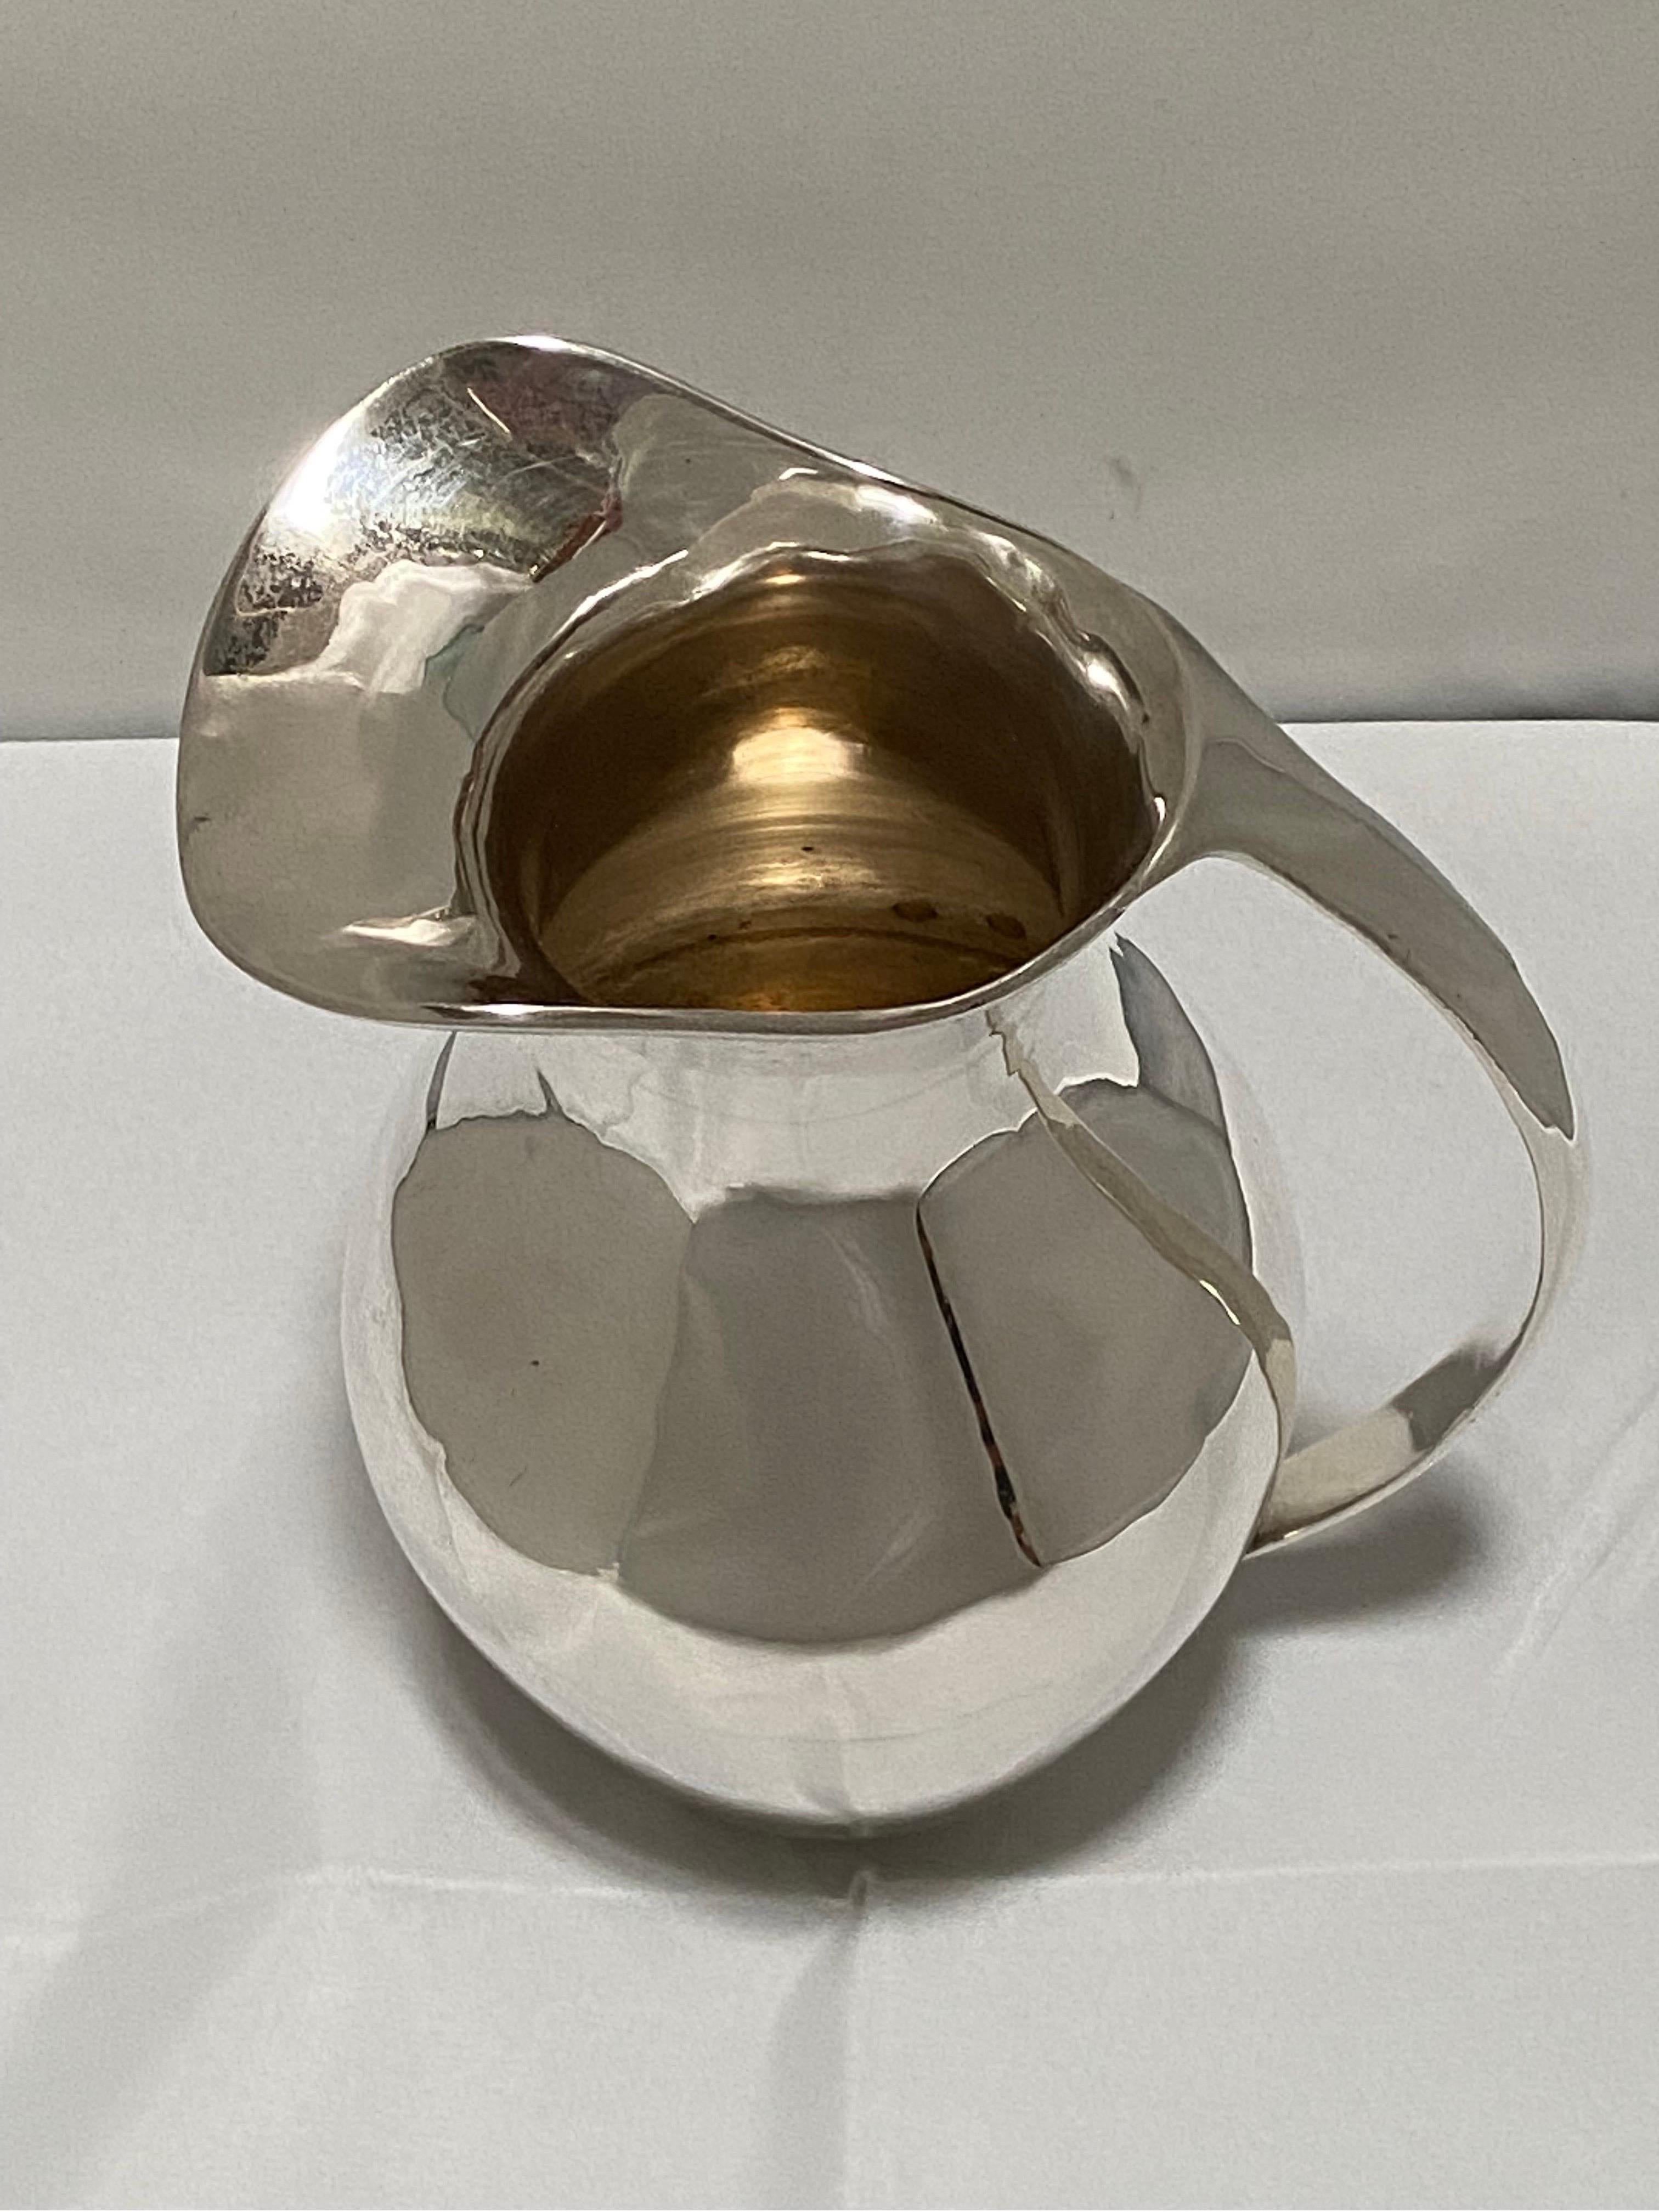 20th Century Vintage Mid-Century Mexican Sterling Silver Modernist Pitcher or Ewer by Zurita For Sale